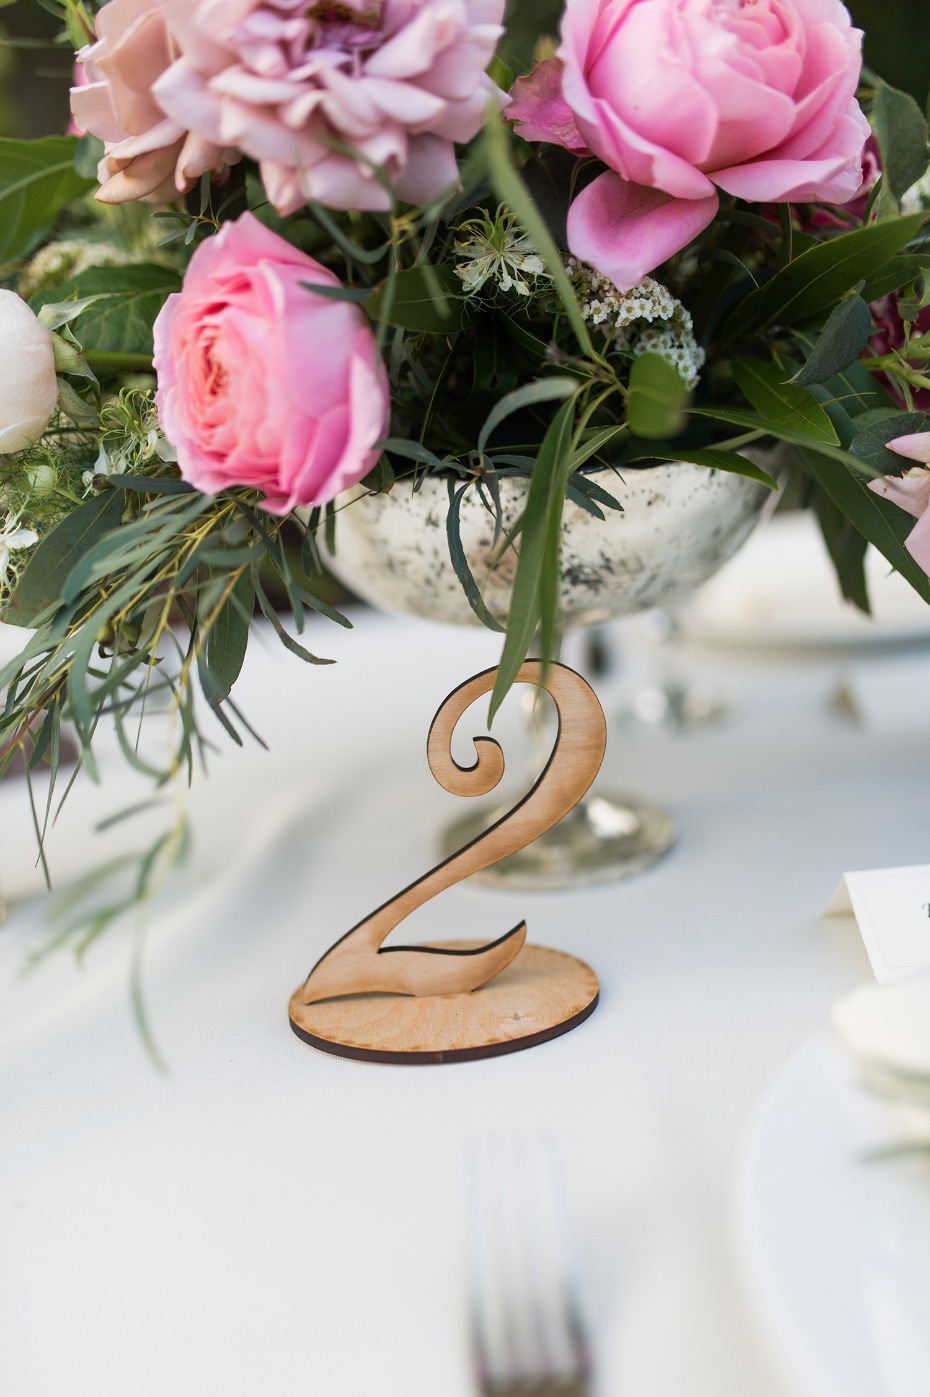 Wood cut table number